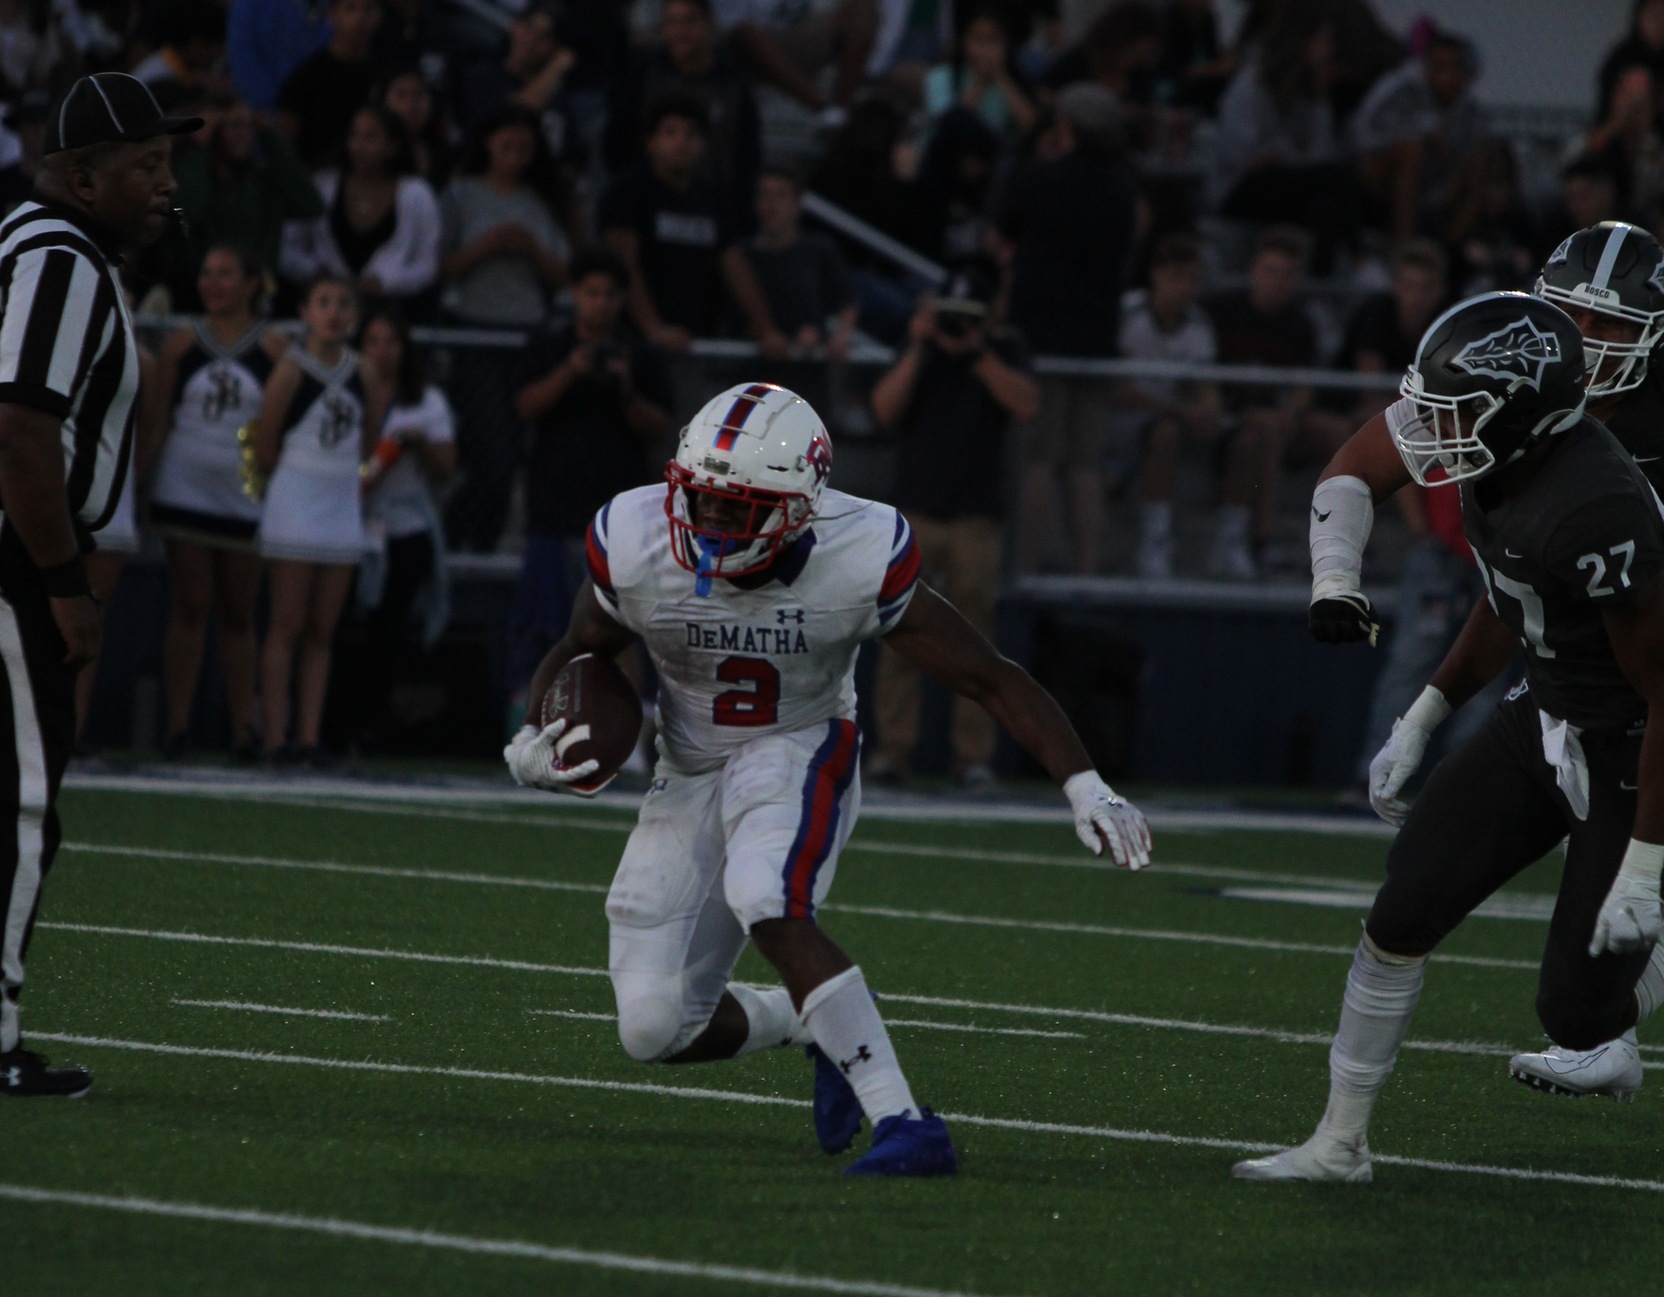 DeMatha Running Back, MarShawn Lloyd (shown in an earlier game this year) continued his success on the ground.  (PHOTO BY: Ed King)